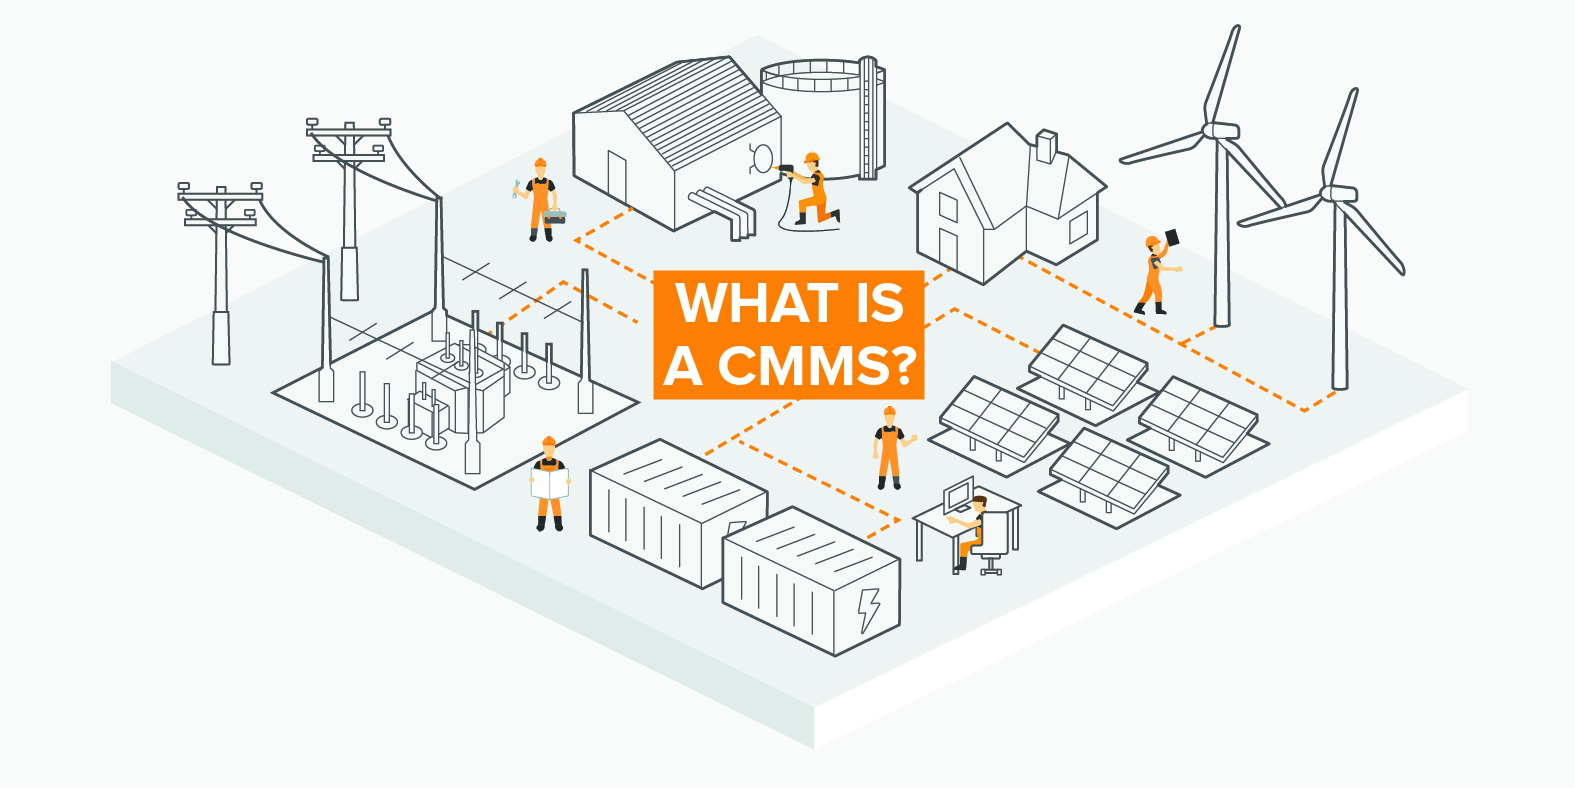 Dictionary definition of what is a CMMS?